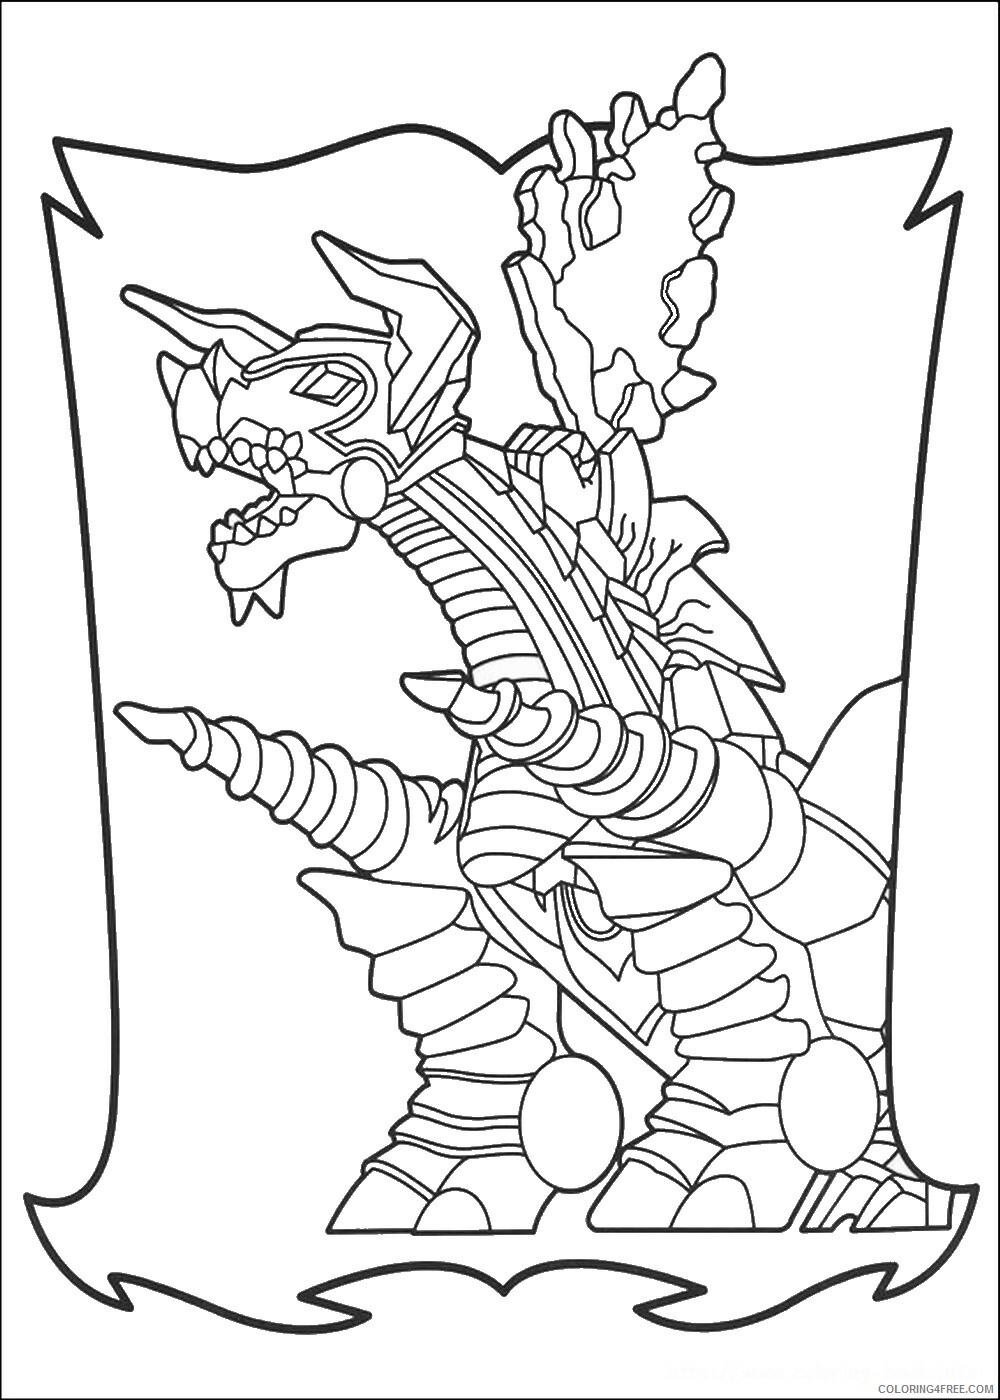 Power Rangers Coloring Pages TV Film power rangers 94 Printable 2020 06723 Coloring4free